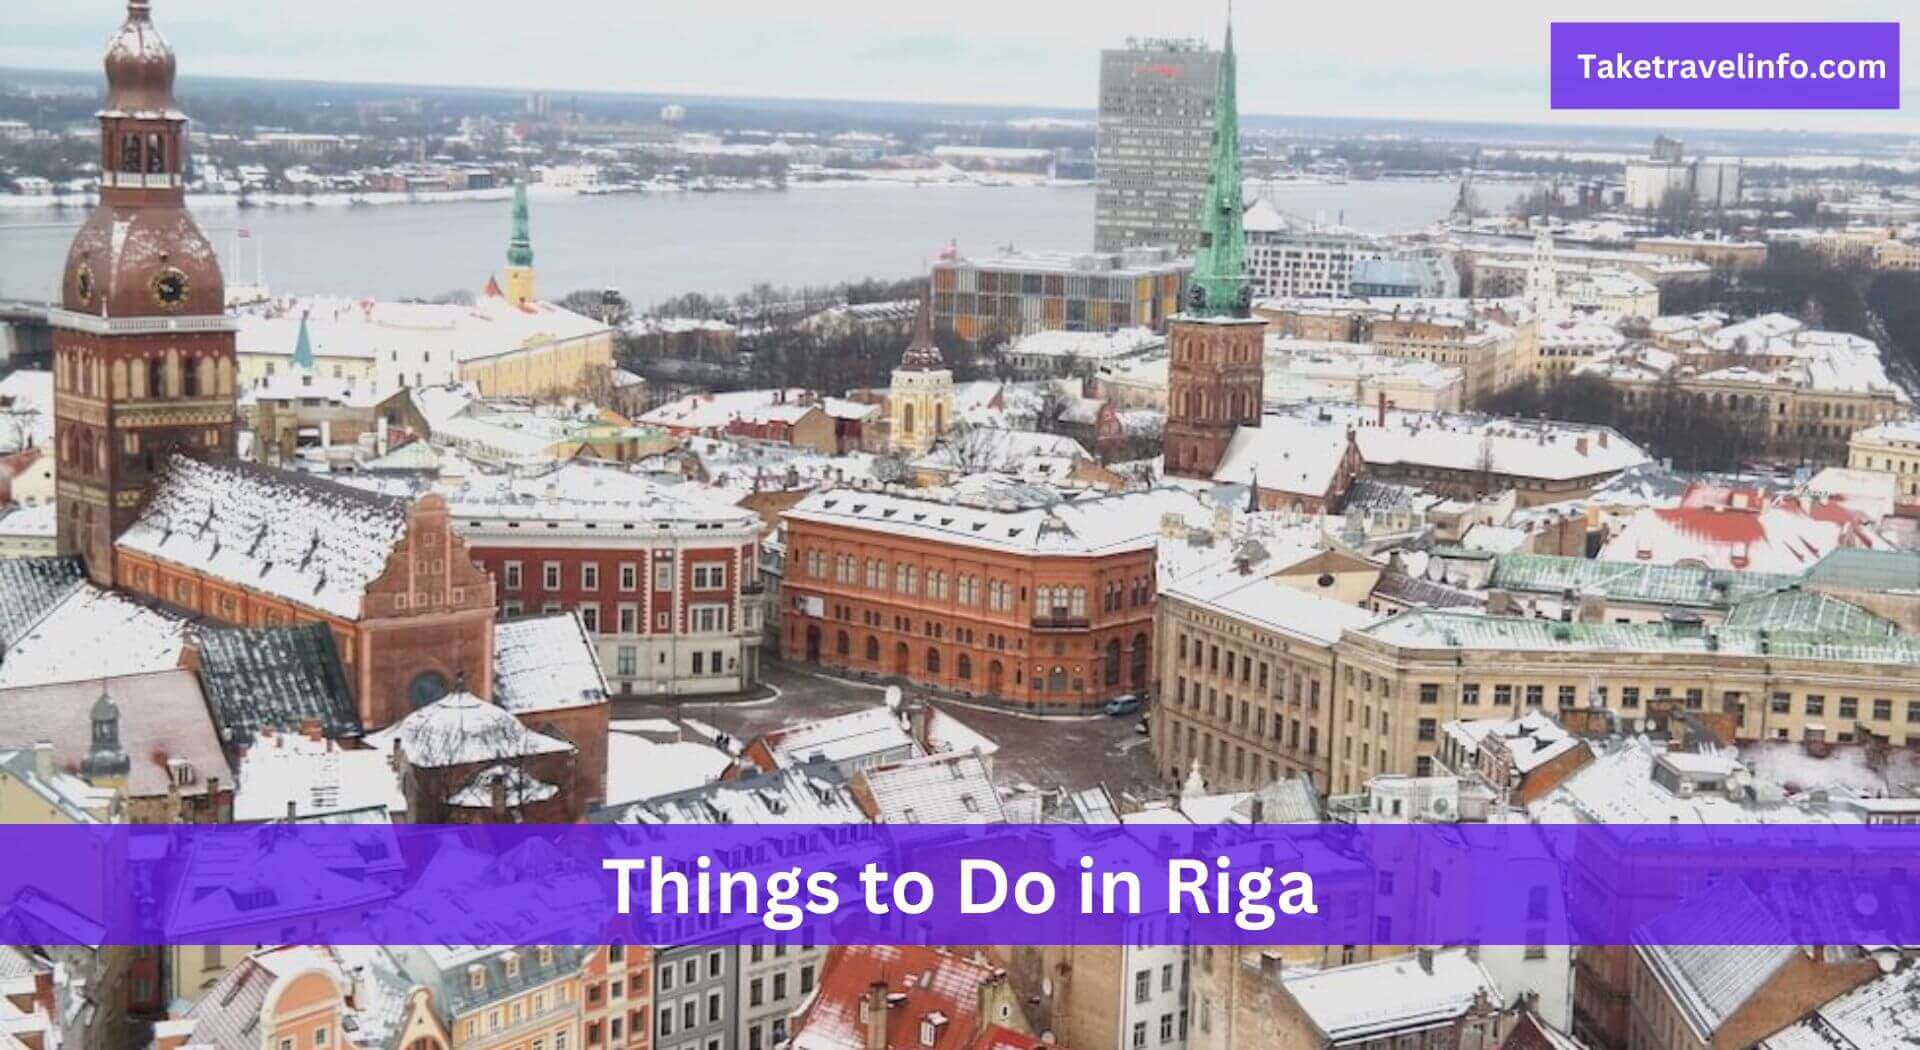 Is Riga Expensive to Visit?